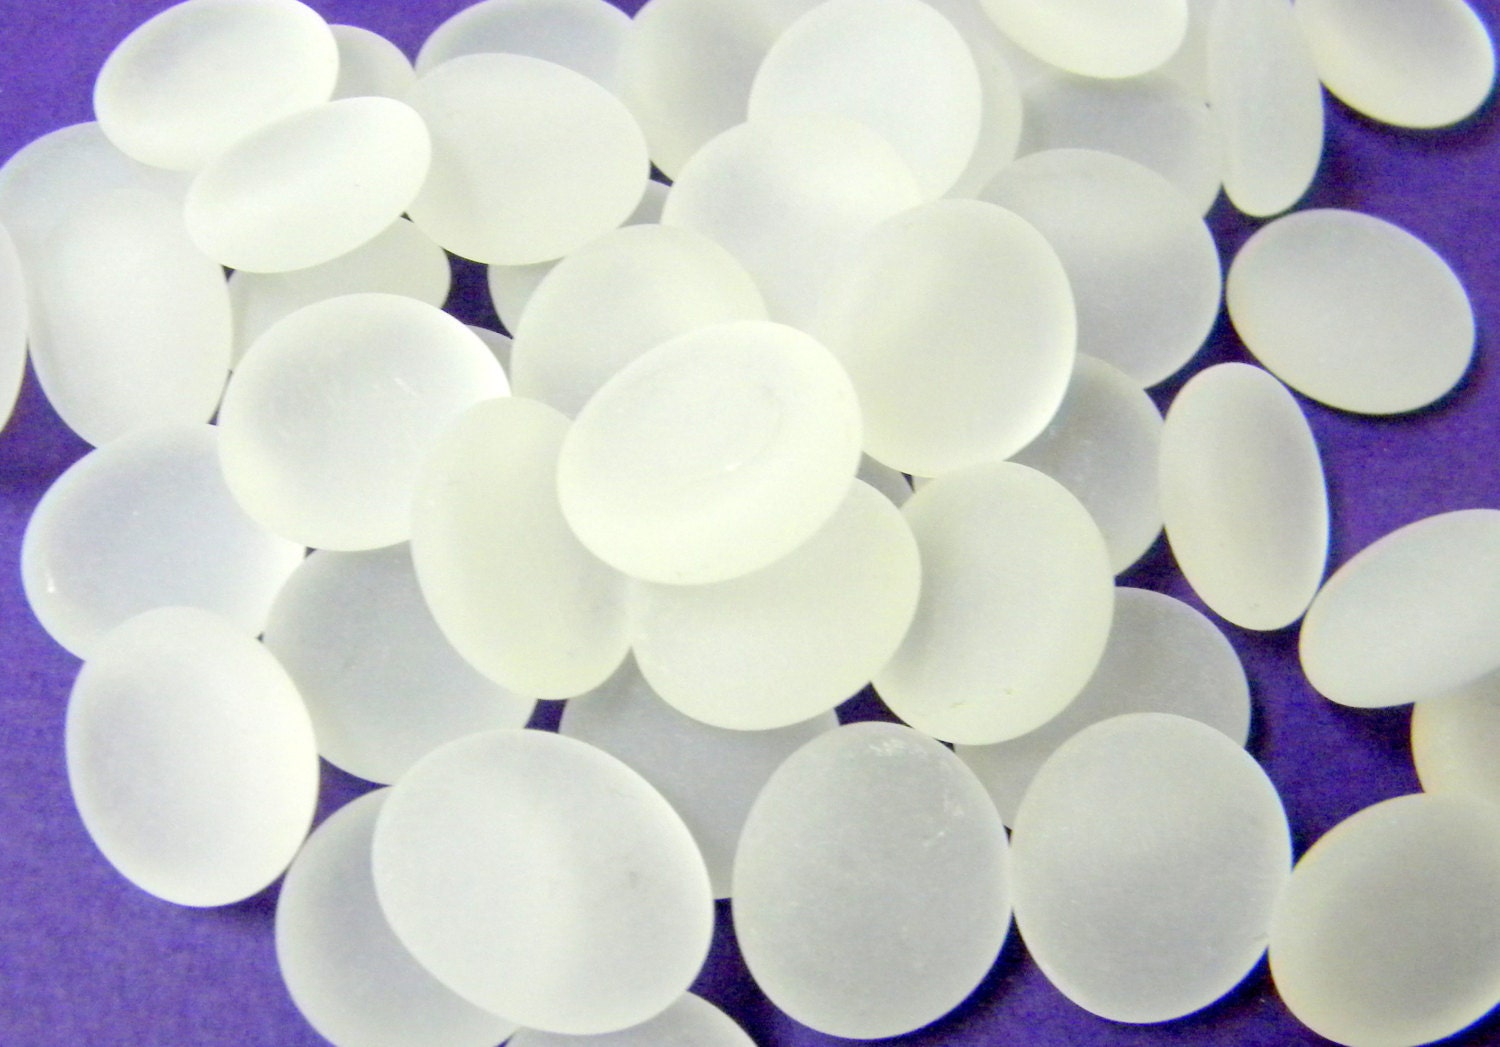 25 Medium White Frosted Glass Gems F 8525